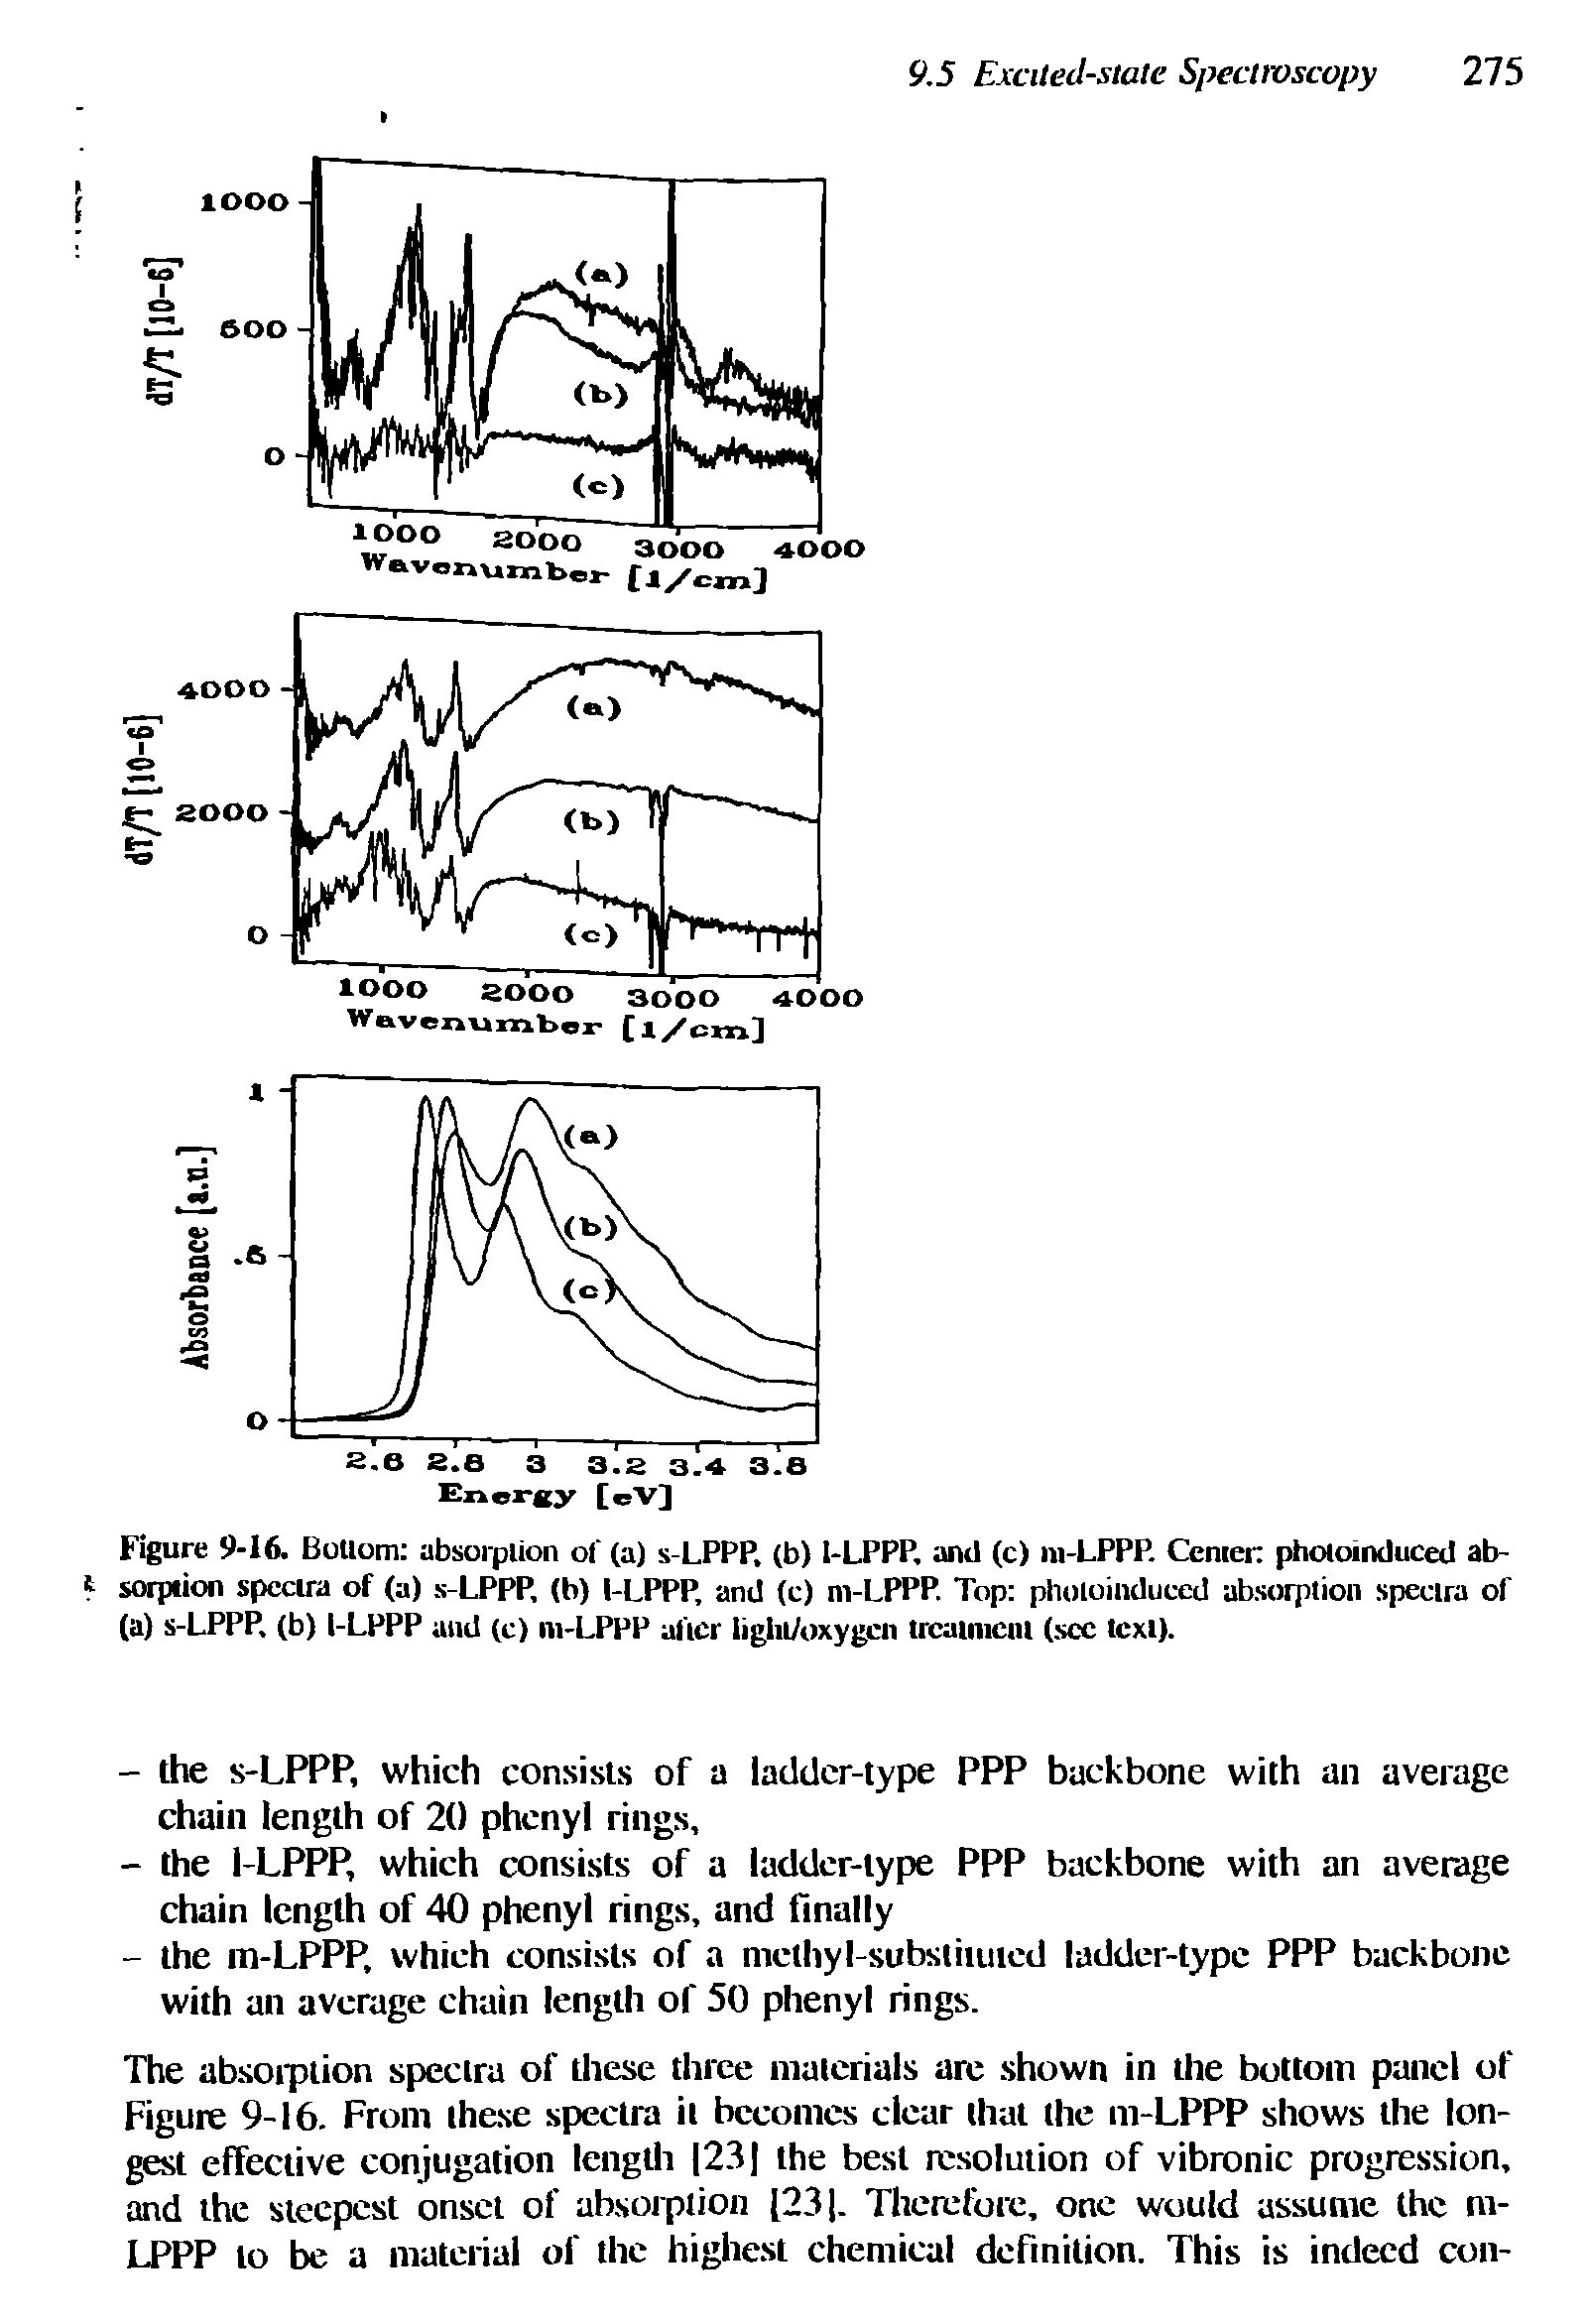 Figure 9-16. BoUom absorption of (a) s-LPPP, (b) 1-LPPP, and (c) m-LPPP. Center photoinduced absorption spectra of (a) s-LPPP, (b) l-LPPP, and (c) m-LPPP. Top photoinduced absorption spectra of (a) s-LPPP. (b) l-LPPP and (c) m-LPPP after liglufoxygcn treatment (sec text).